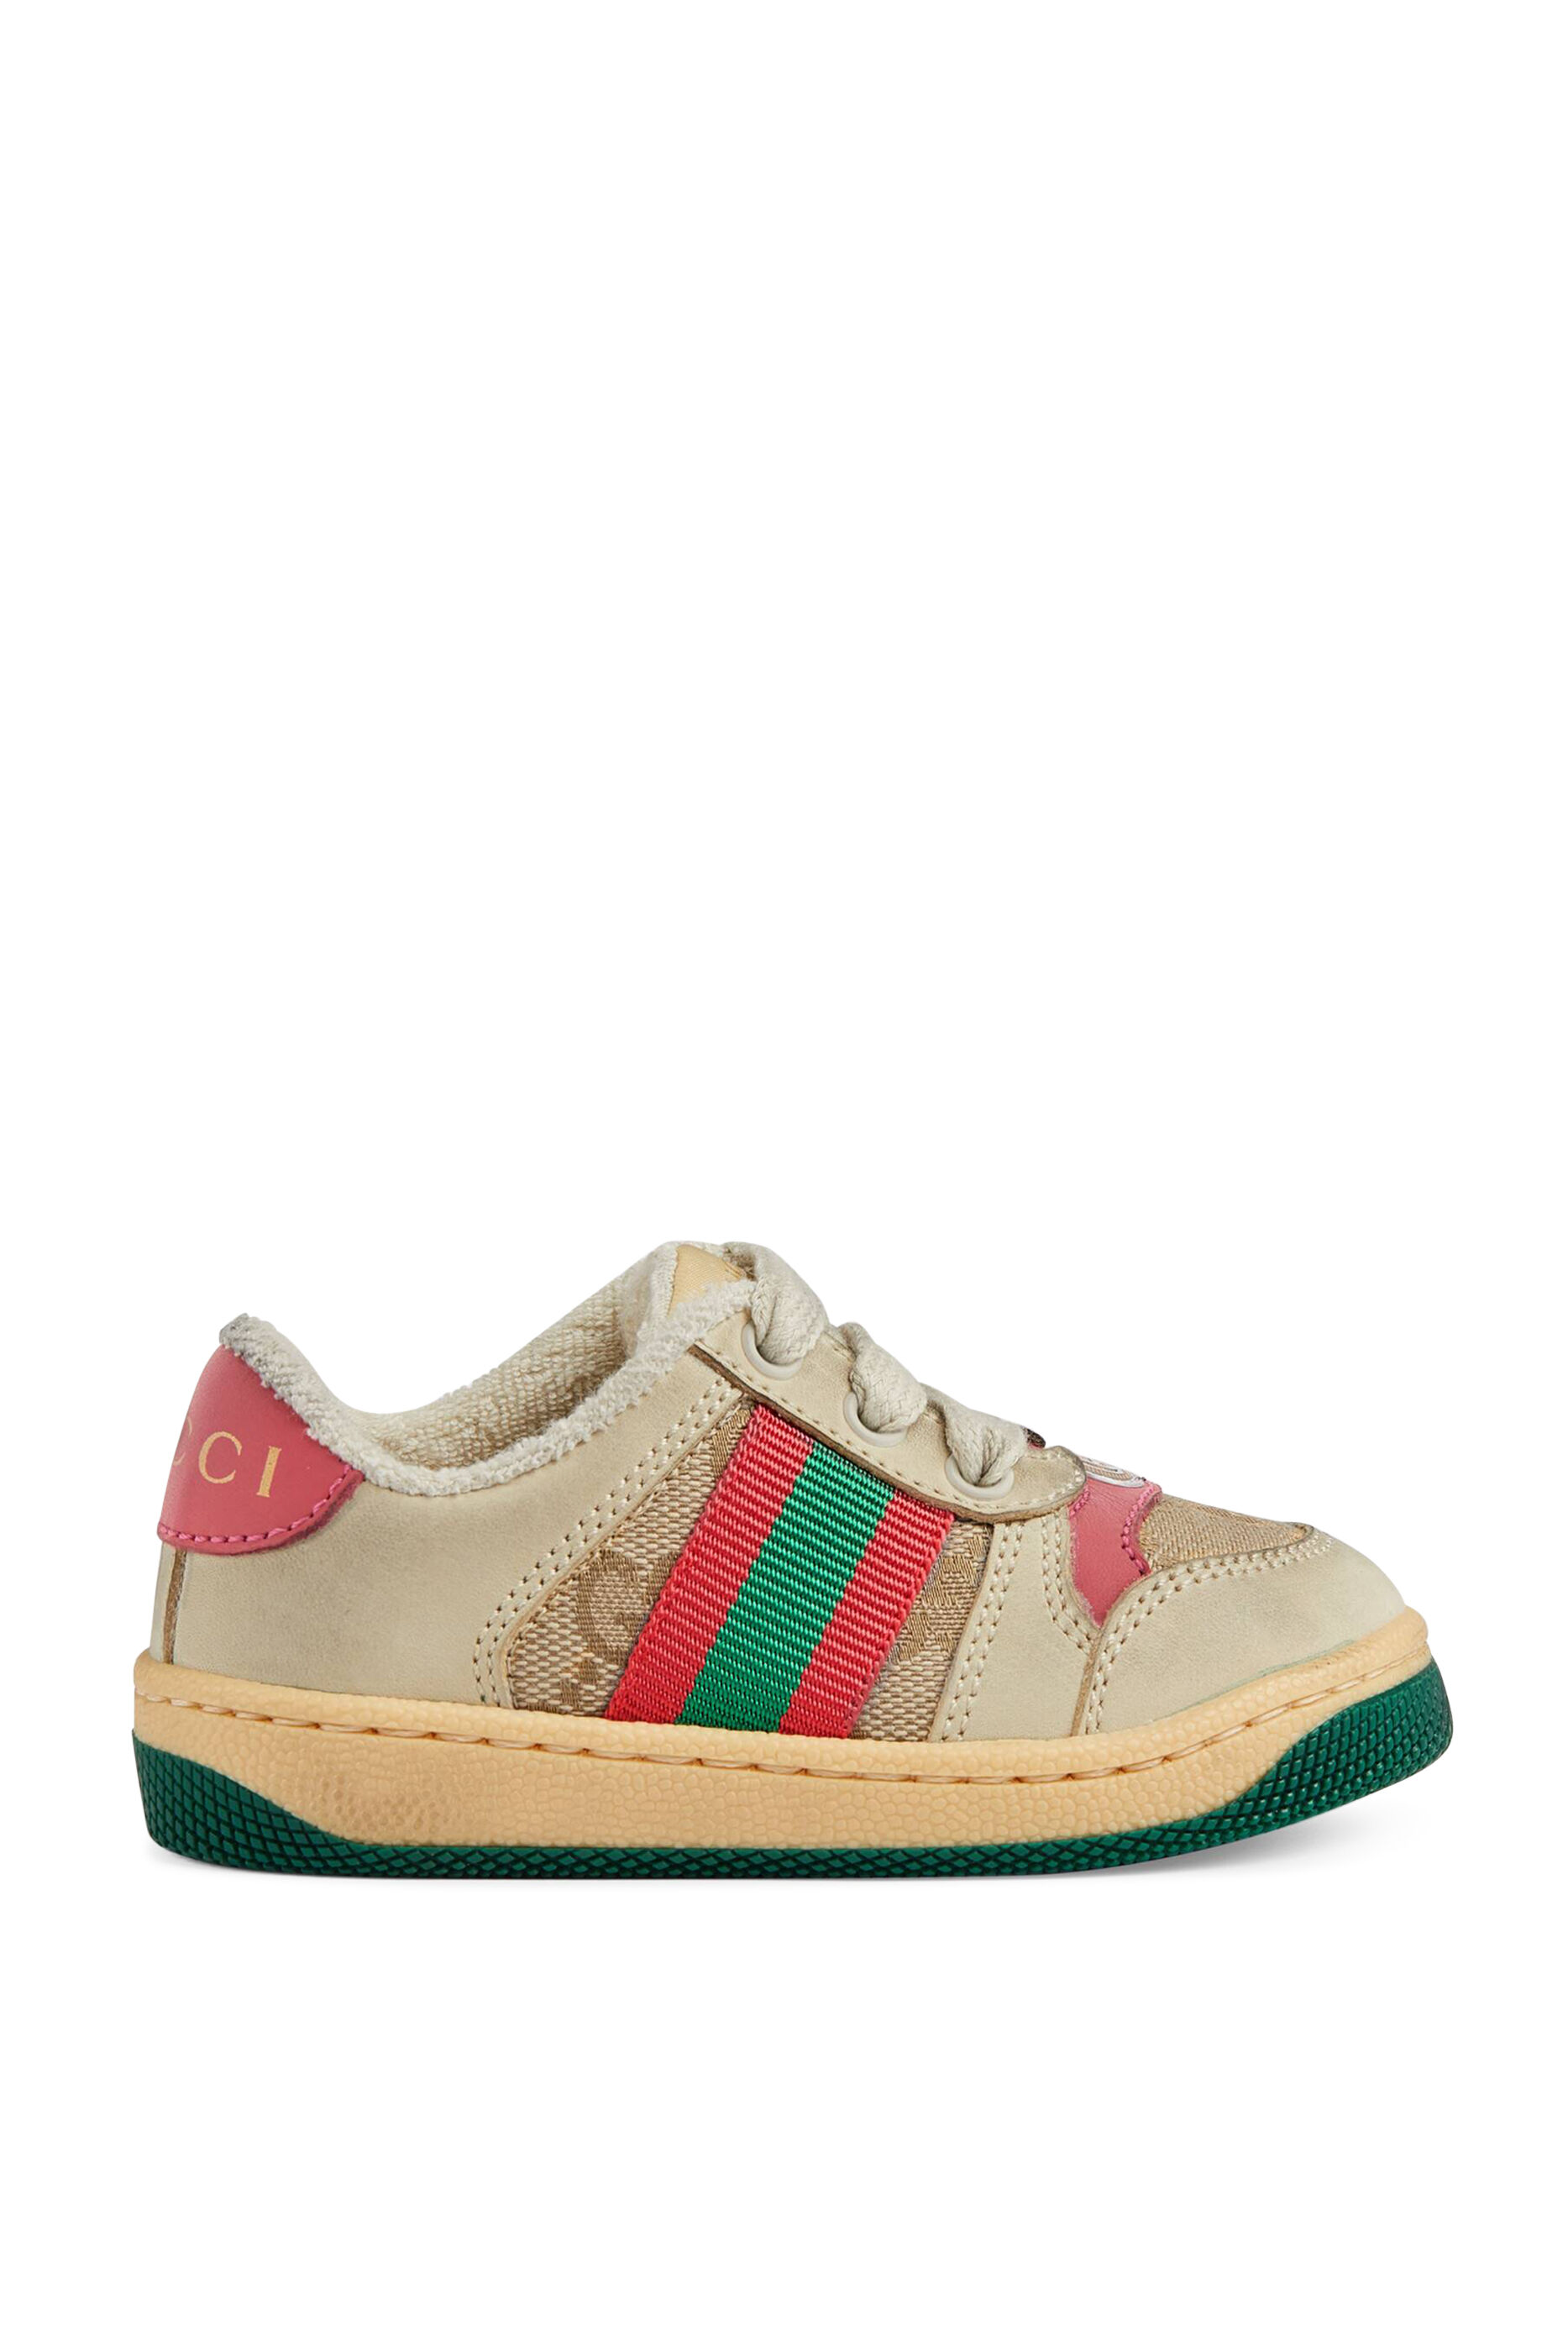 Buy Gucci GG Canvas Sneakers - Kids for 